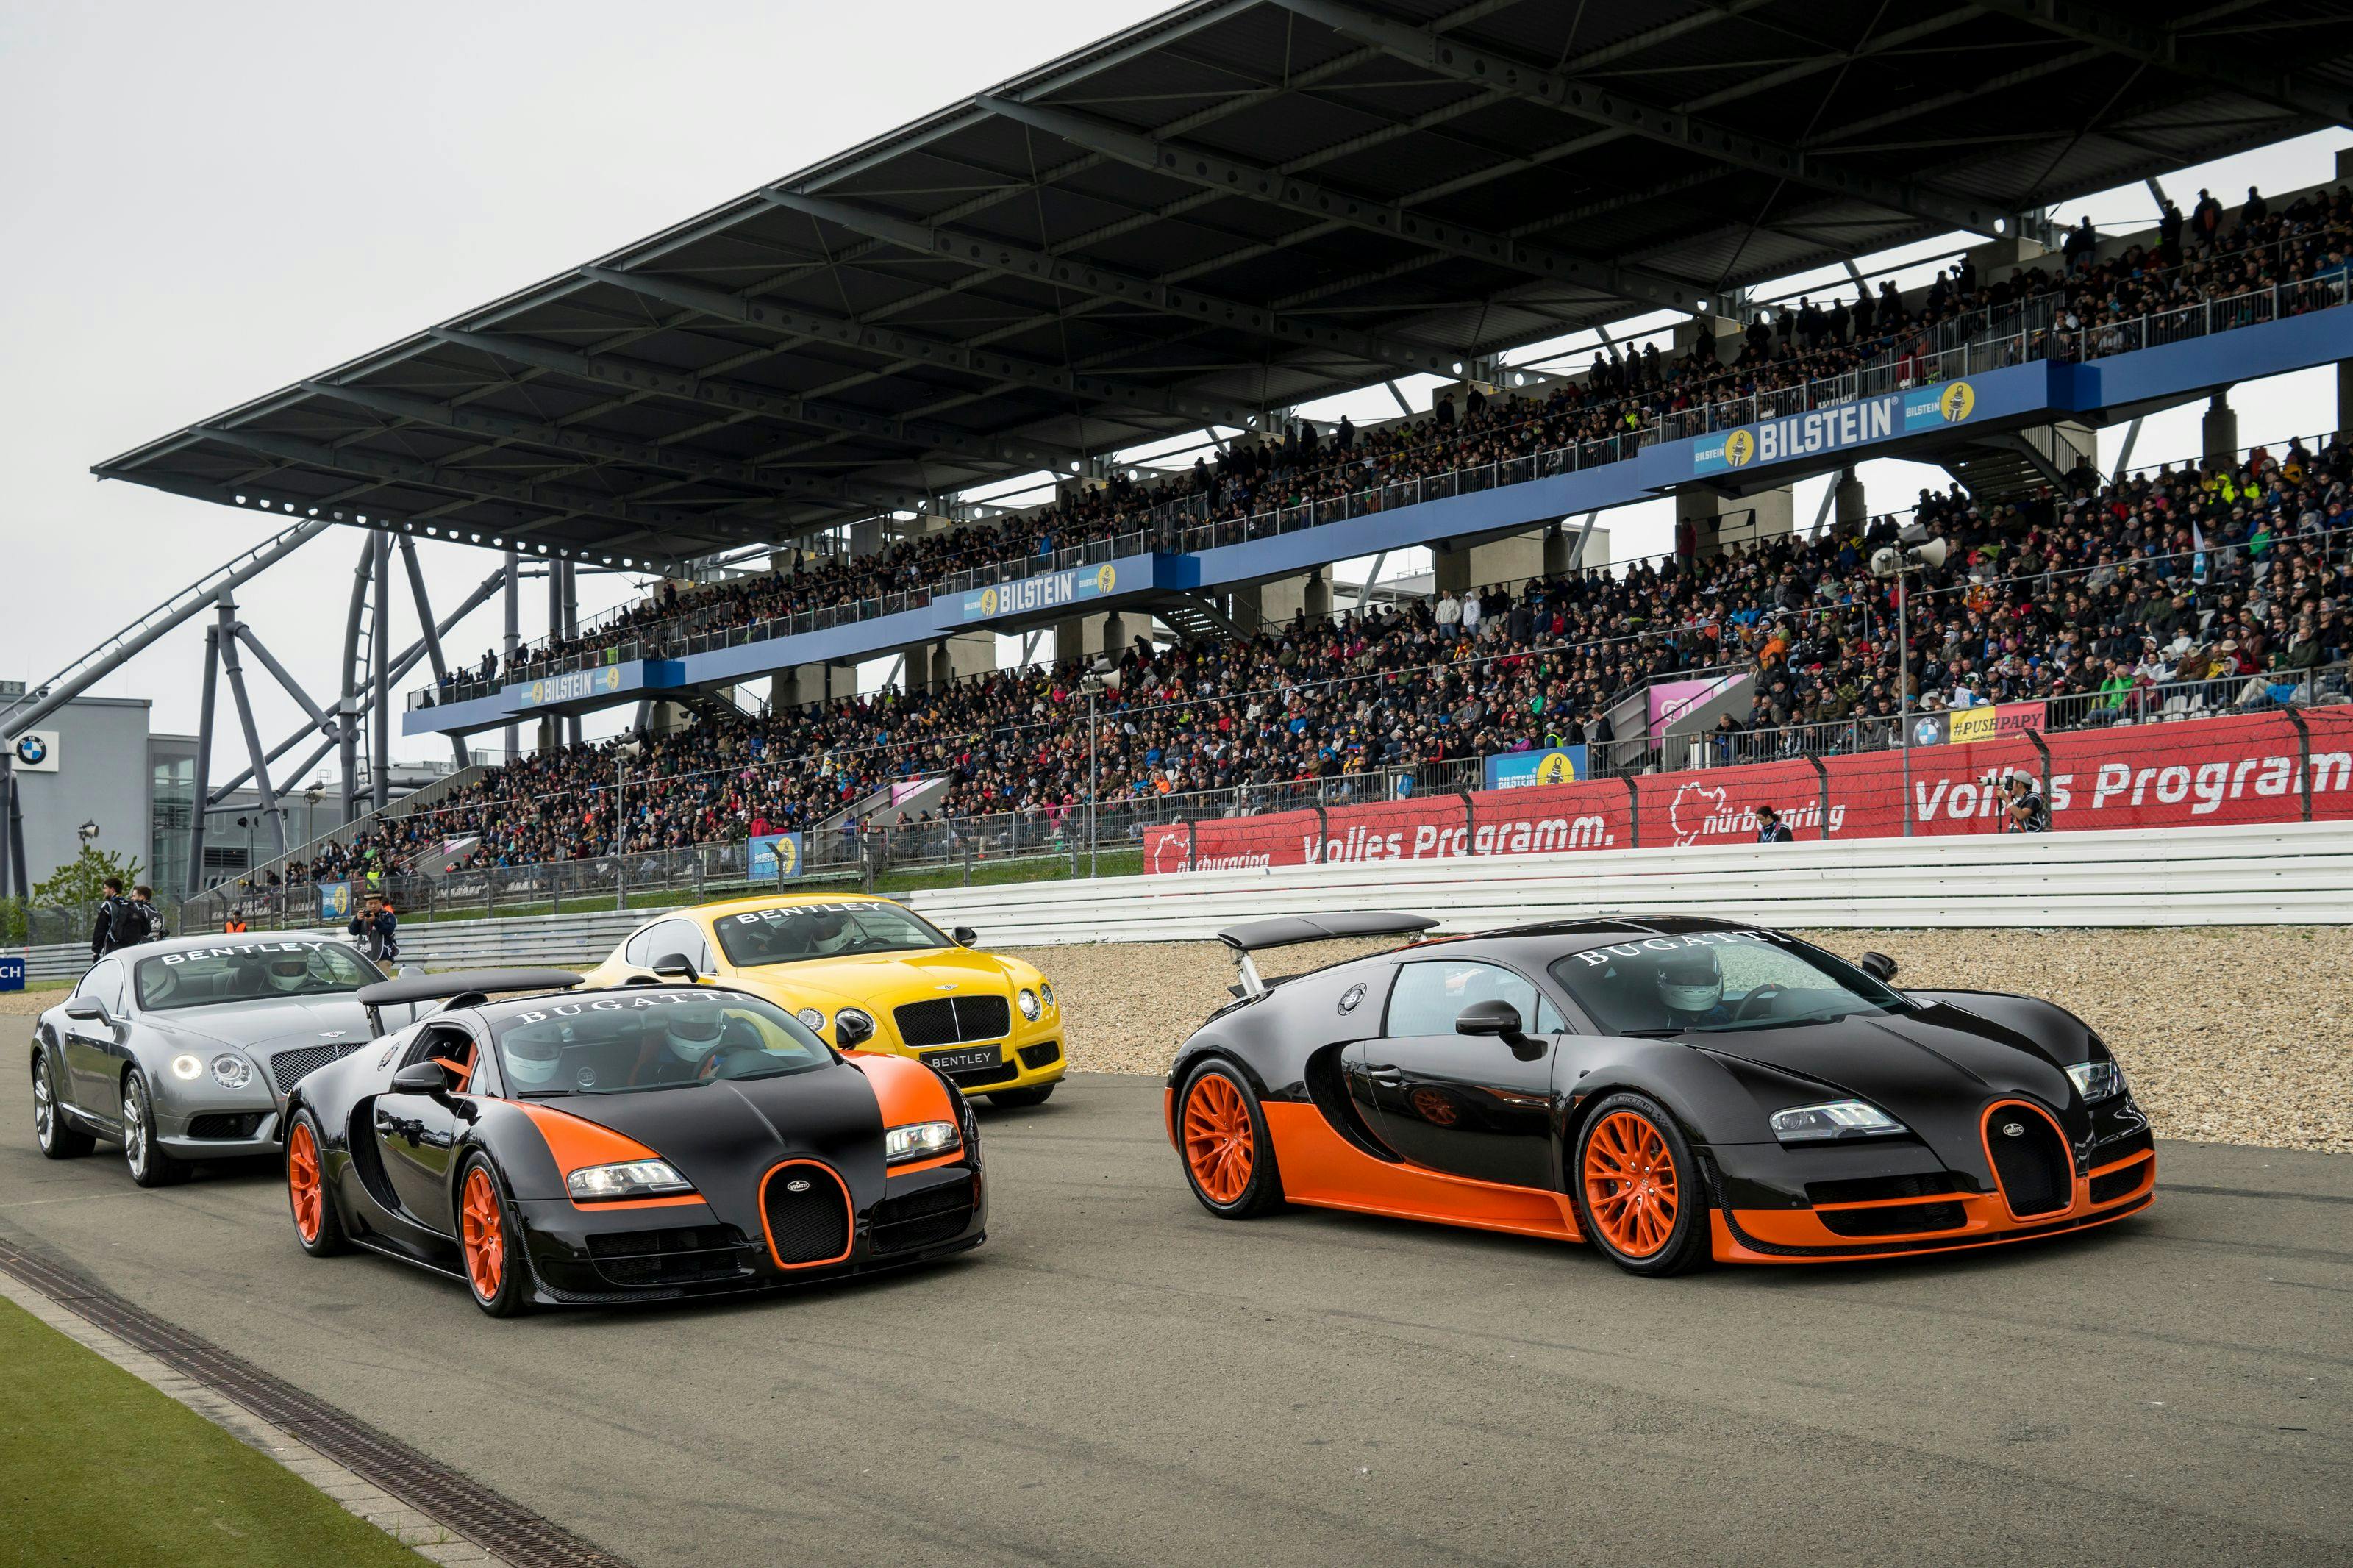 Bugatti Photo Release: Two world speed record cars at the Nuerburgring